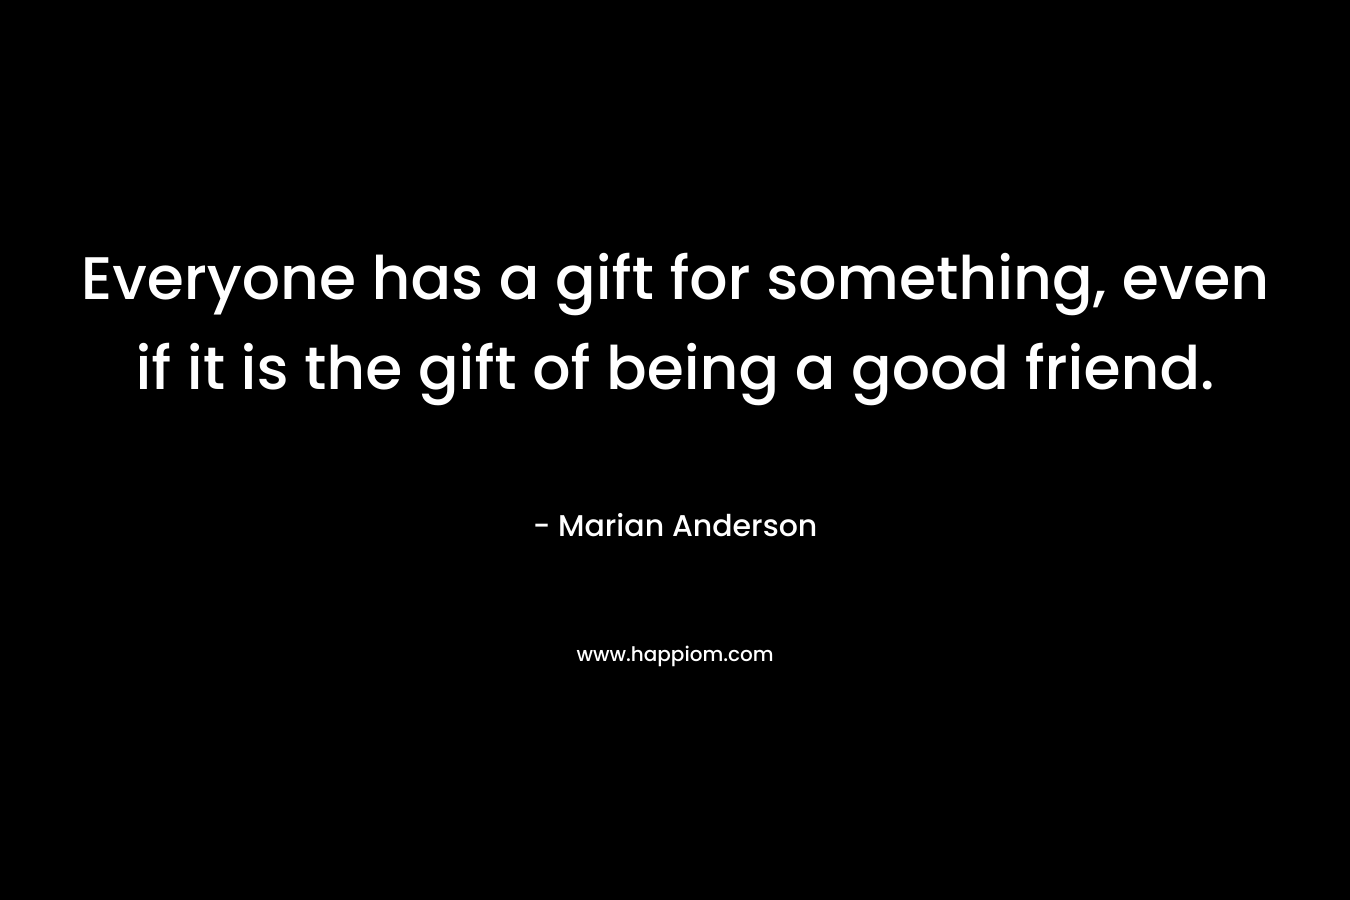 Everyone has a gift for something, even if it is the gift of being a good friend.